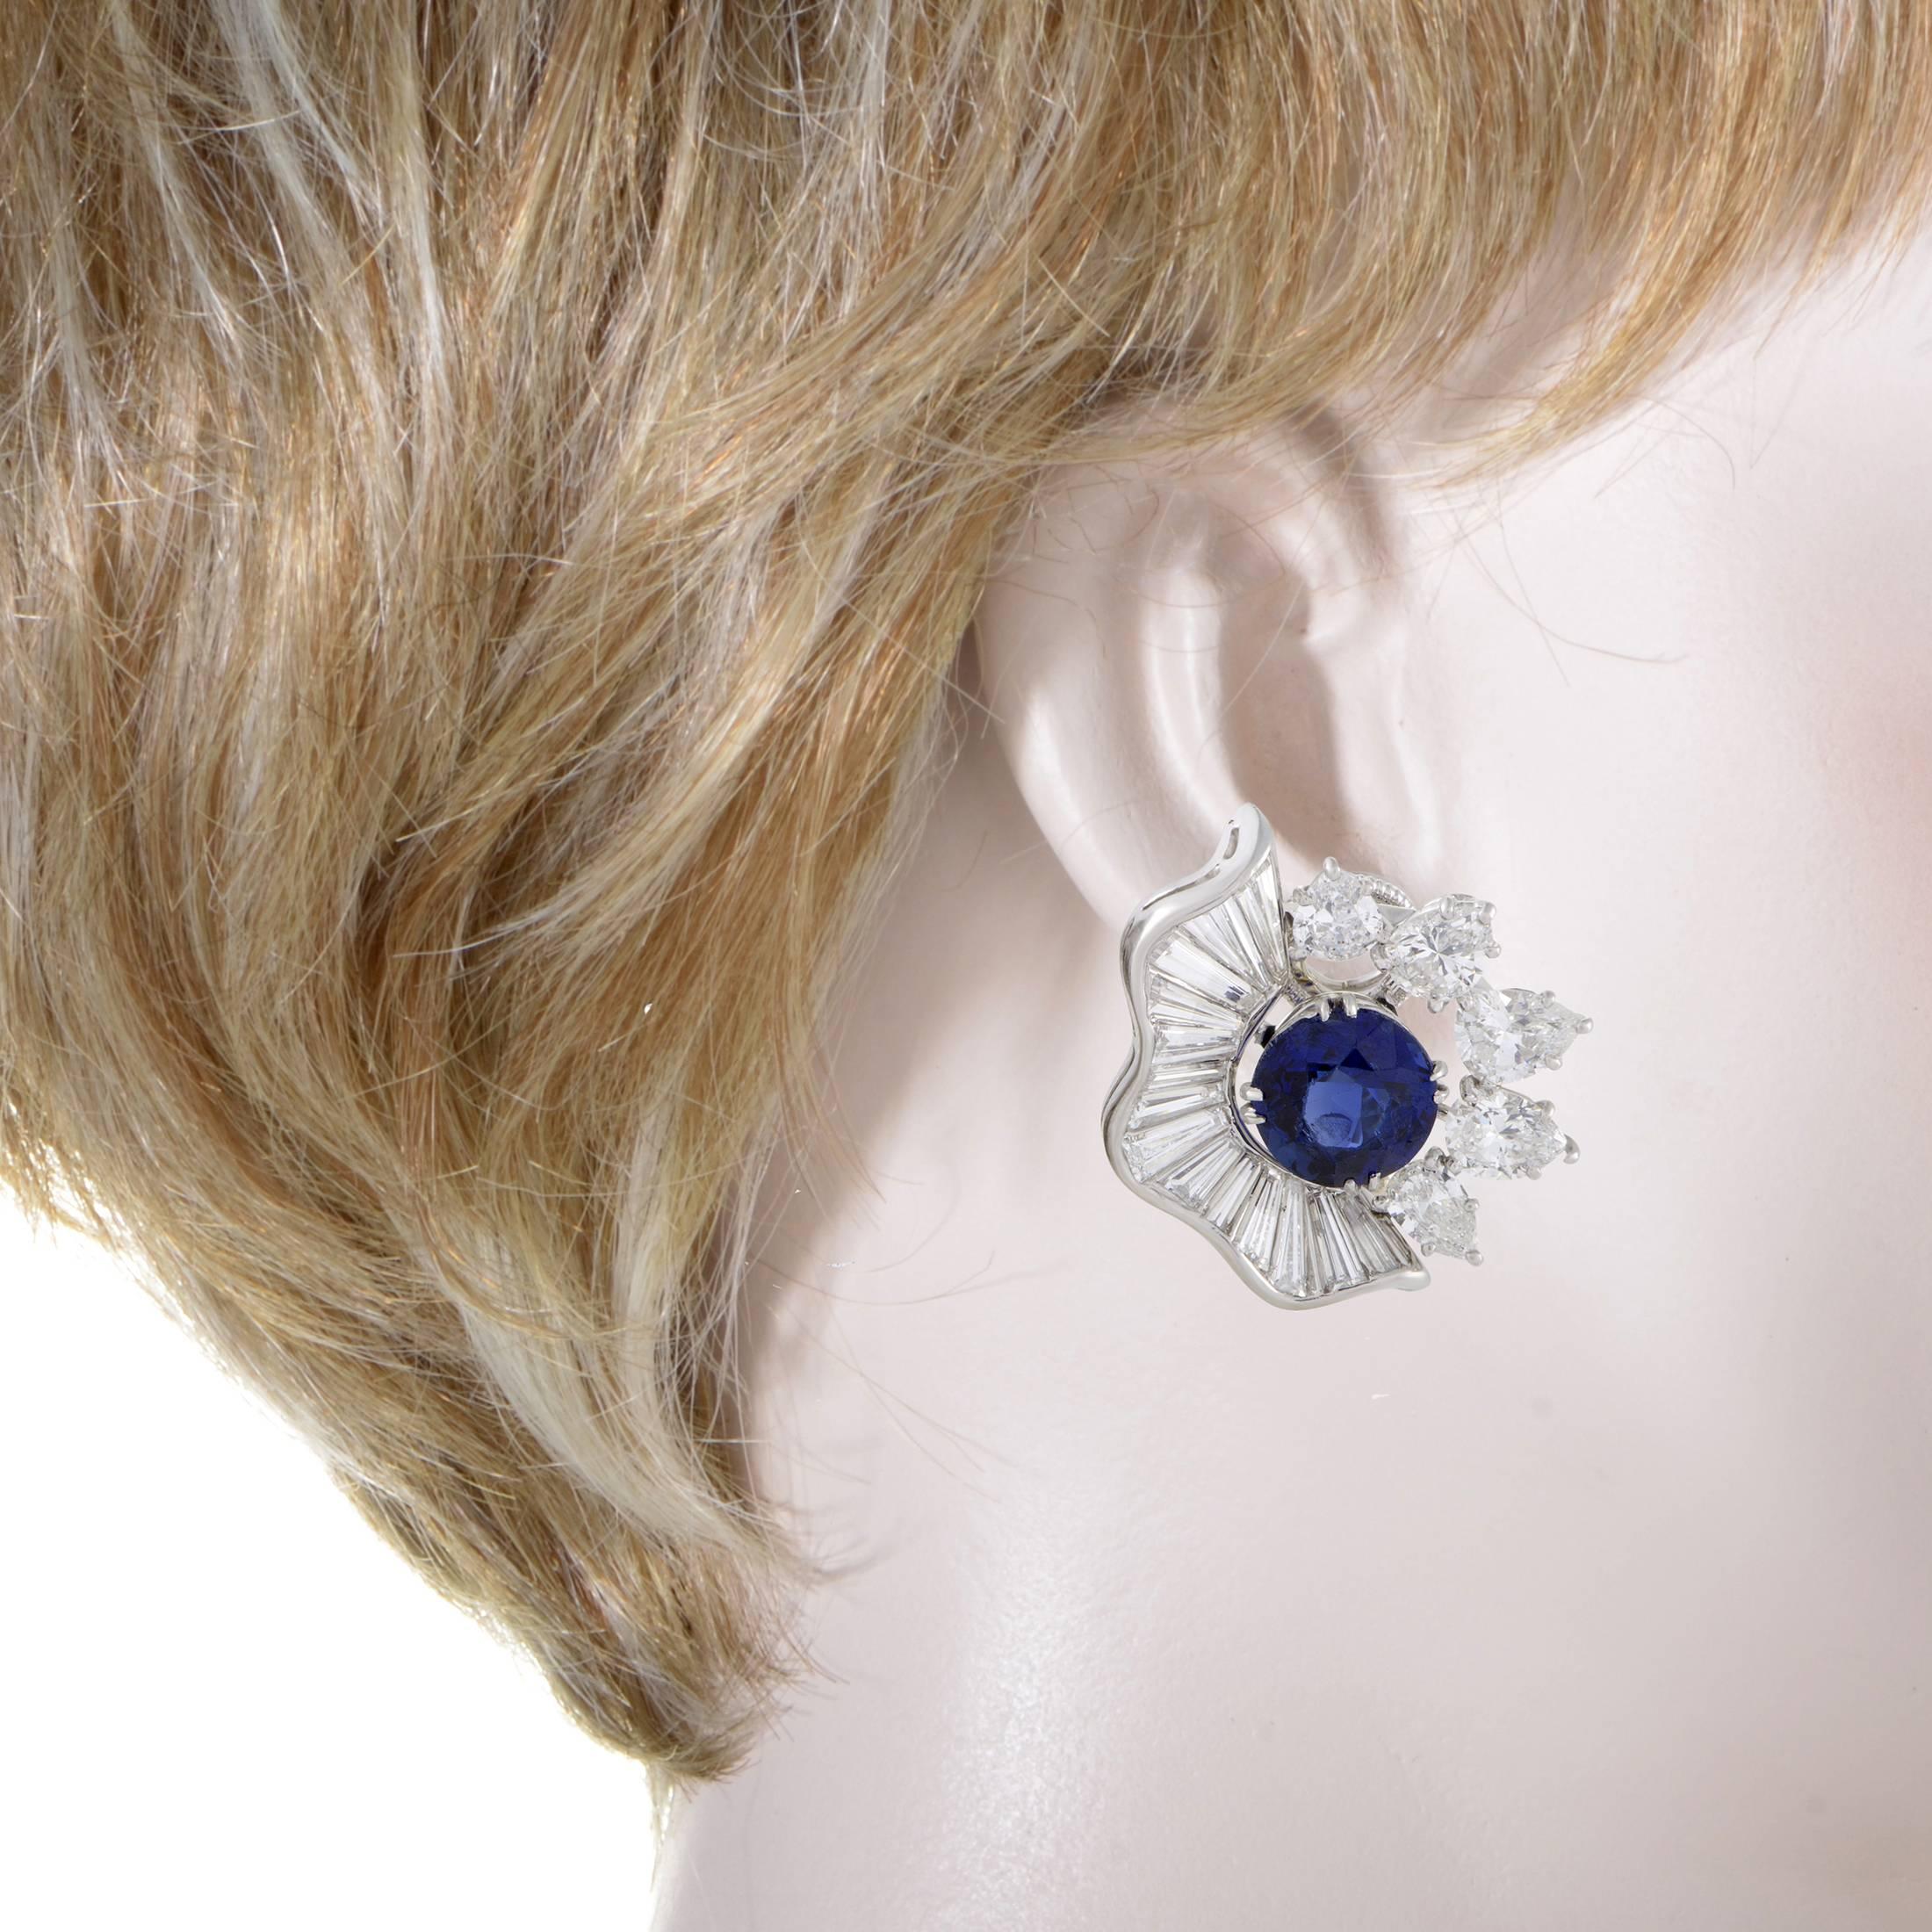 Diversely cut to perfectly fall into a wonderful shape around the regal sapphires totaling approximately 4.00 carats, the glistening diamonds weighing in total approximately 5.50 carats lend their everlasting brilliance to these astonishing platinum